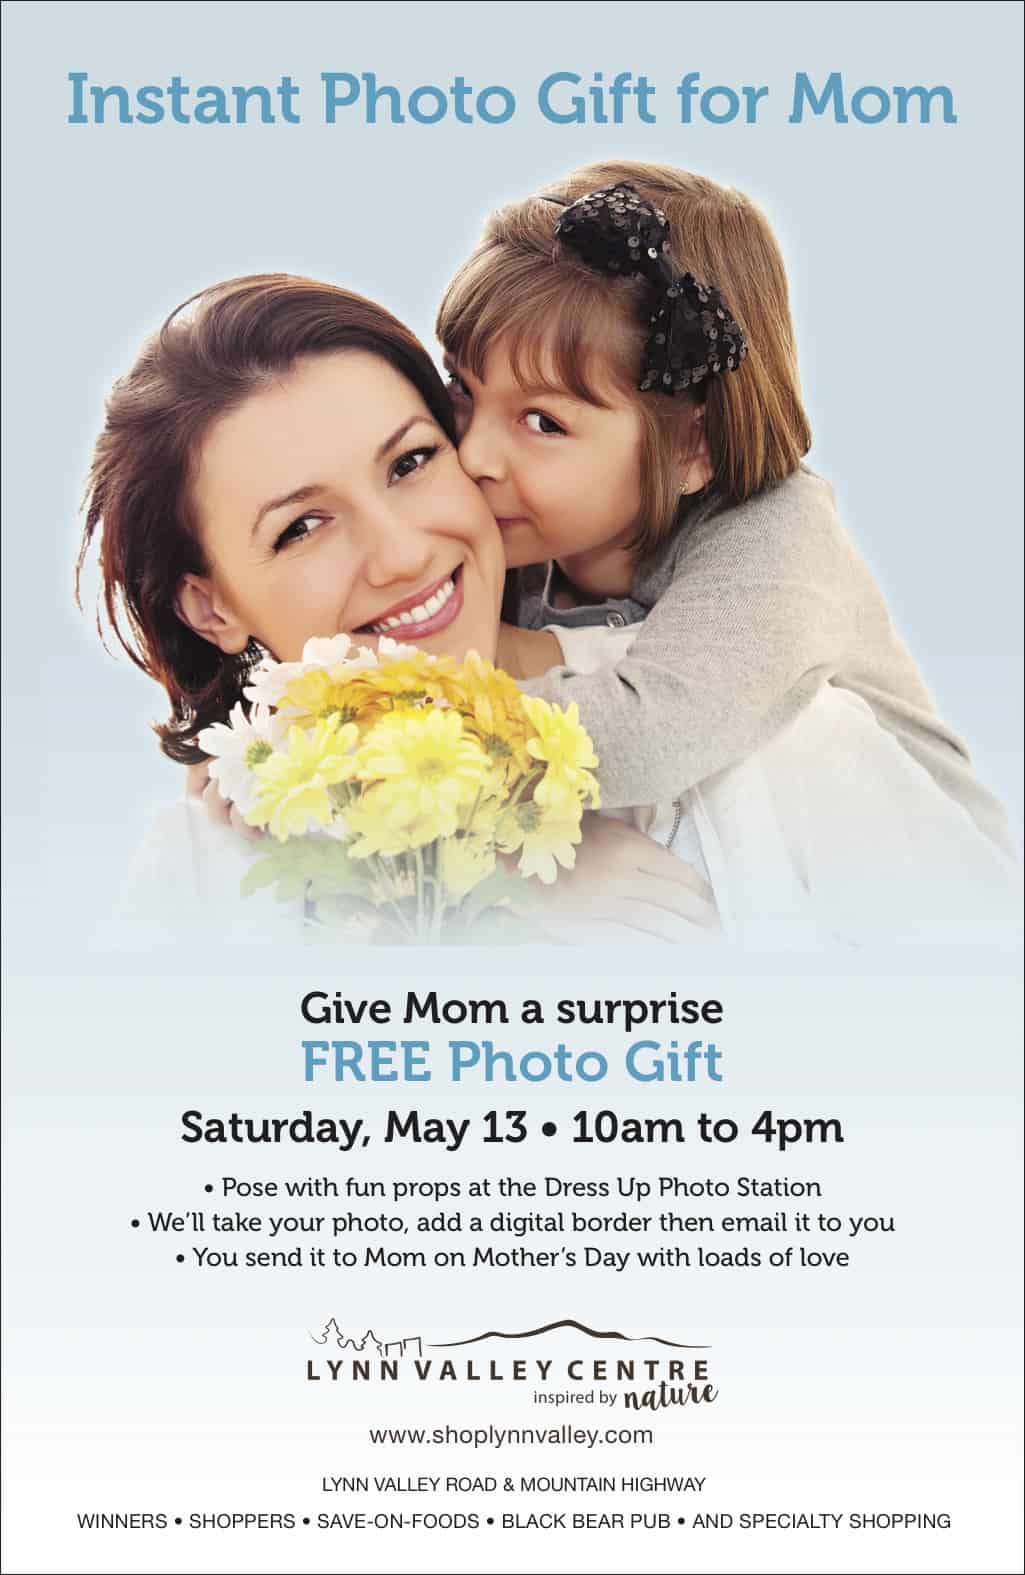 LV Centre Mother's Day 2017